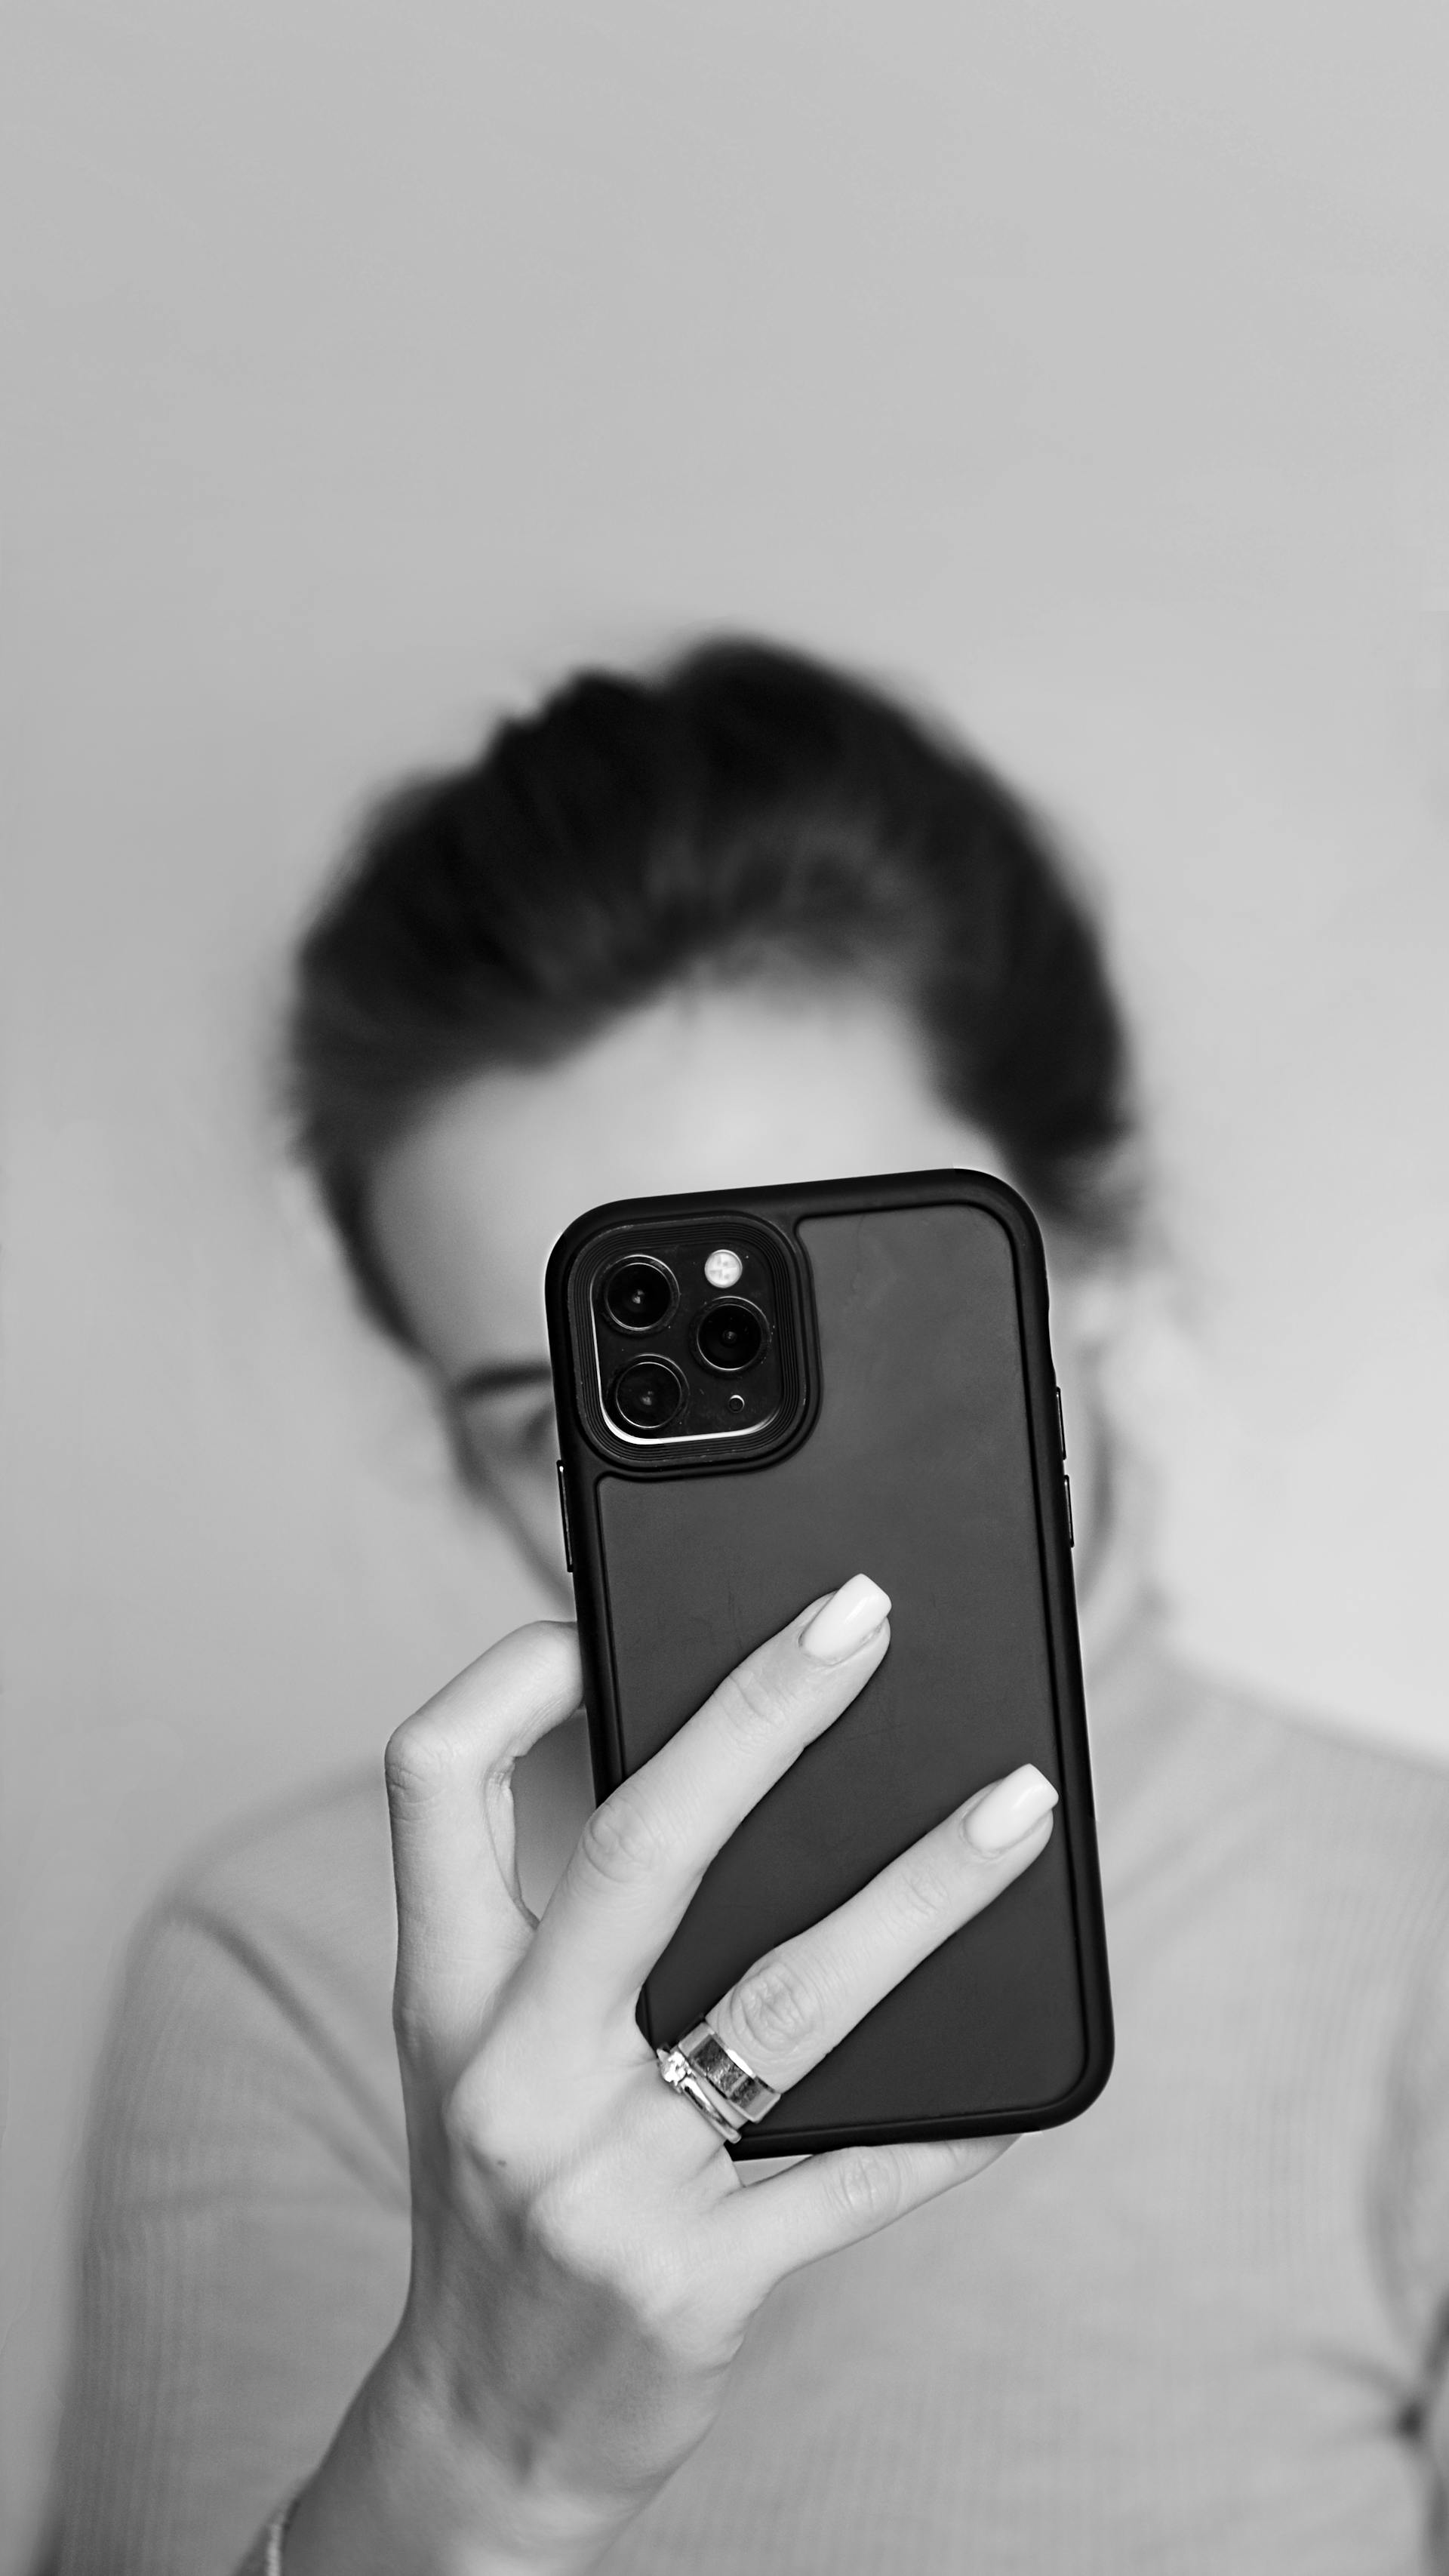 A woman holding a smartphone | Source: Pexels